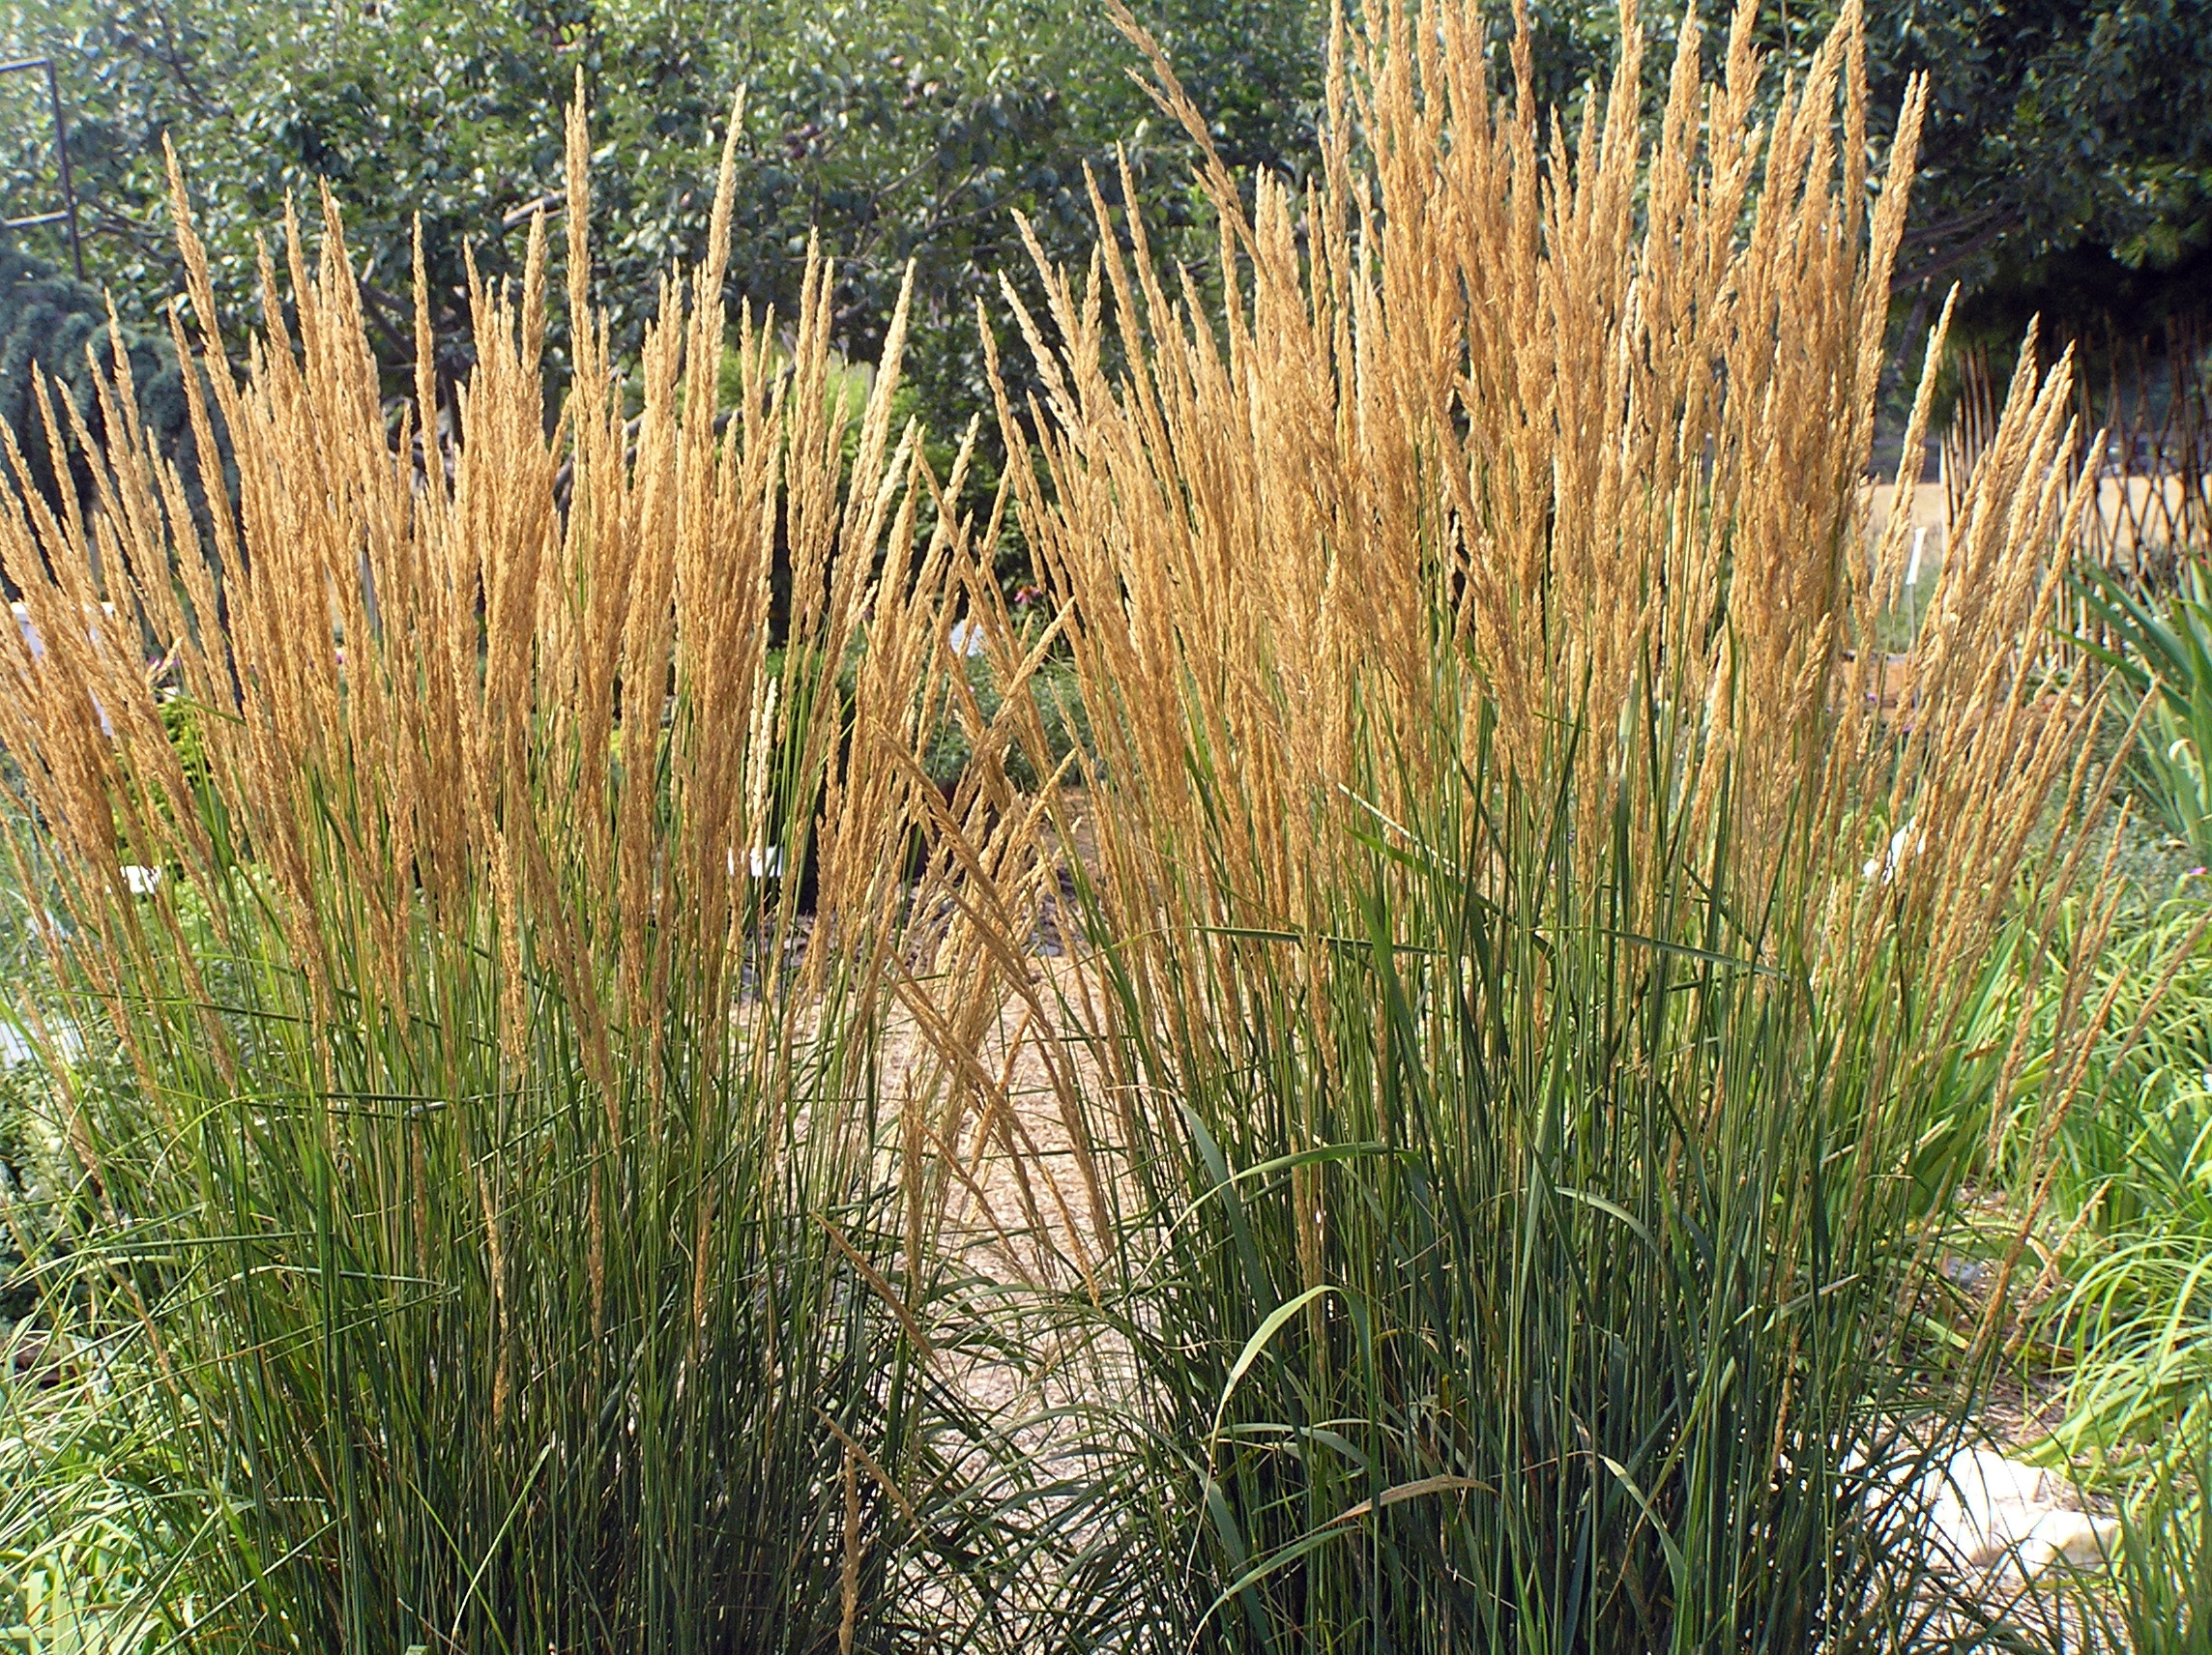 Ornamental Grasses And Grass Like, Sea Grasses For Landscaping